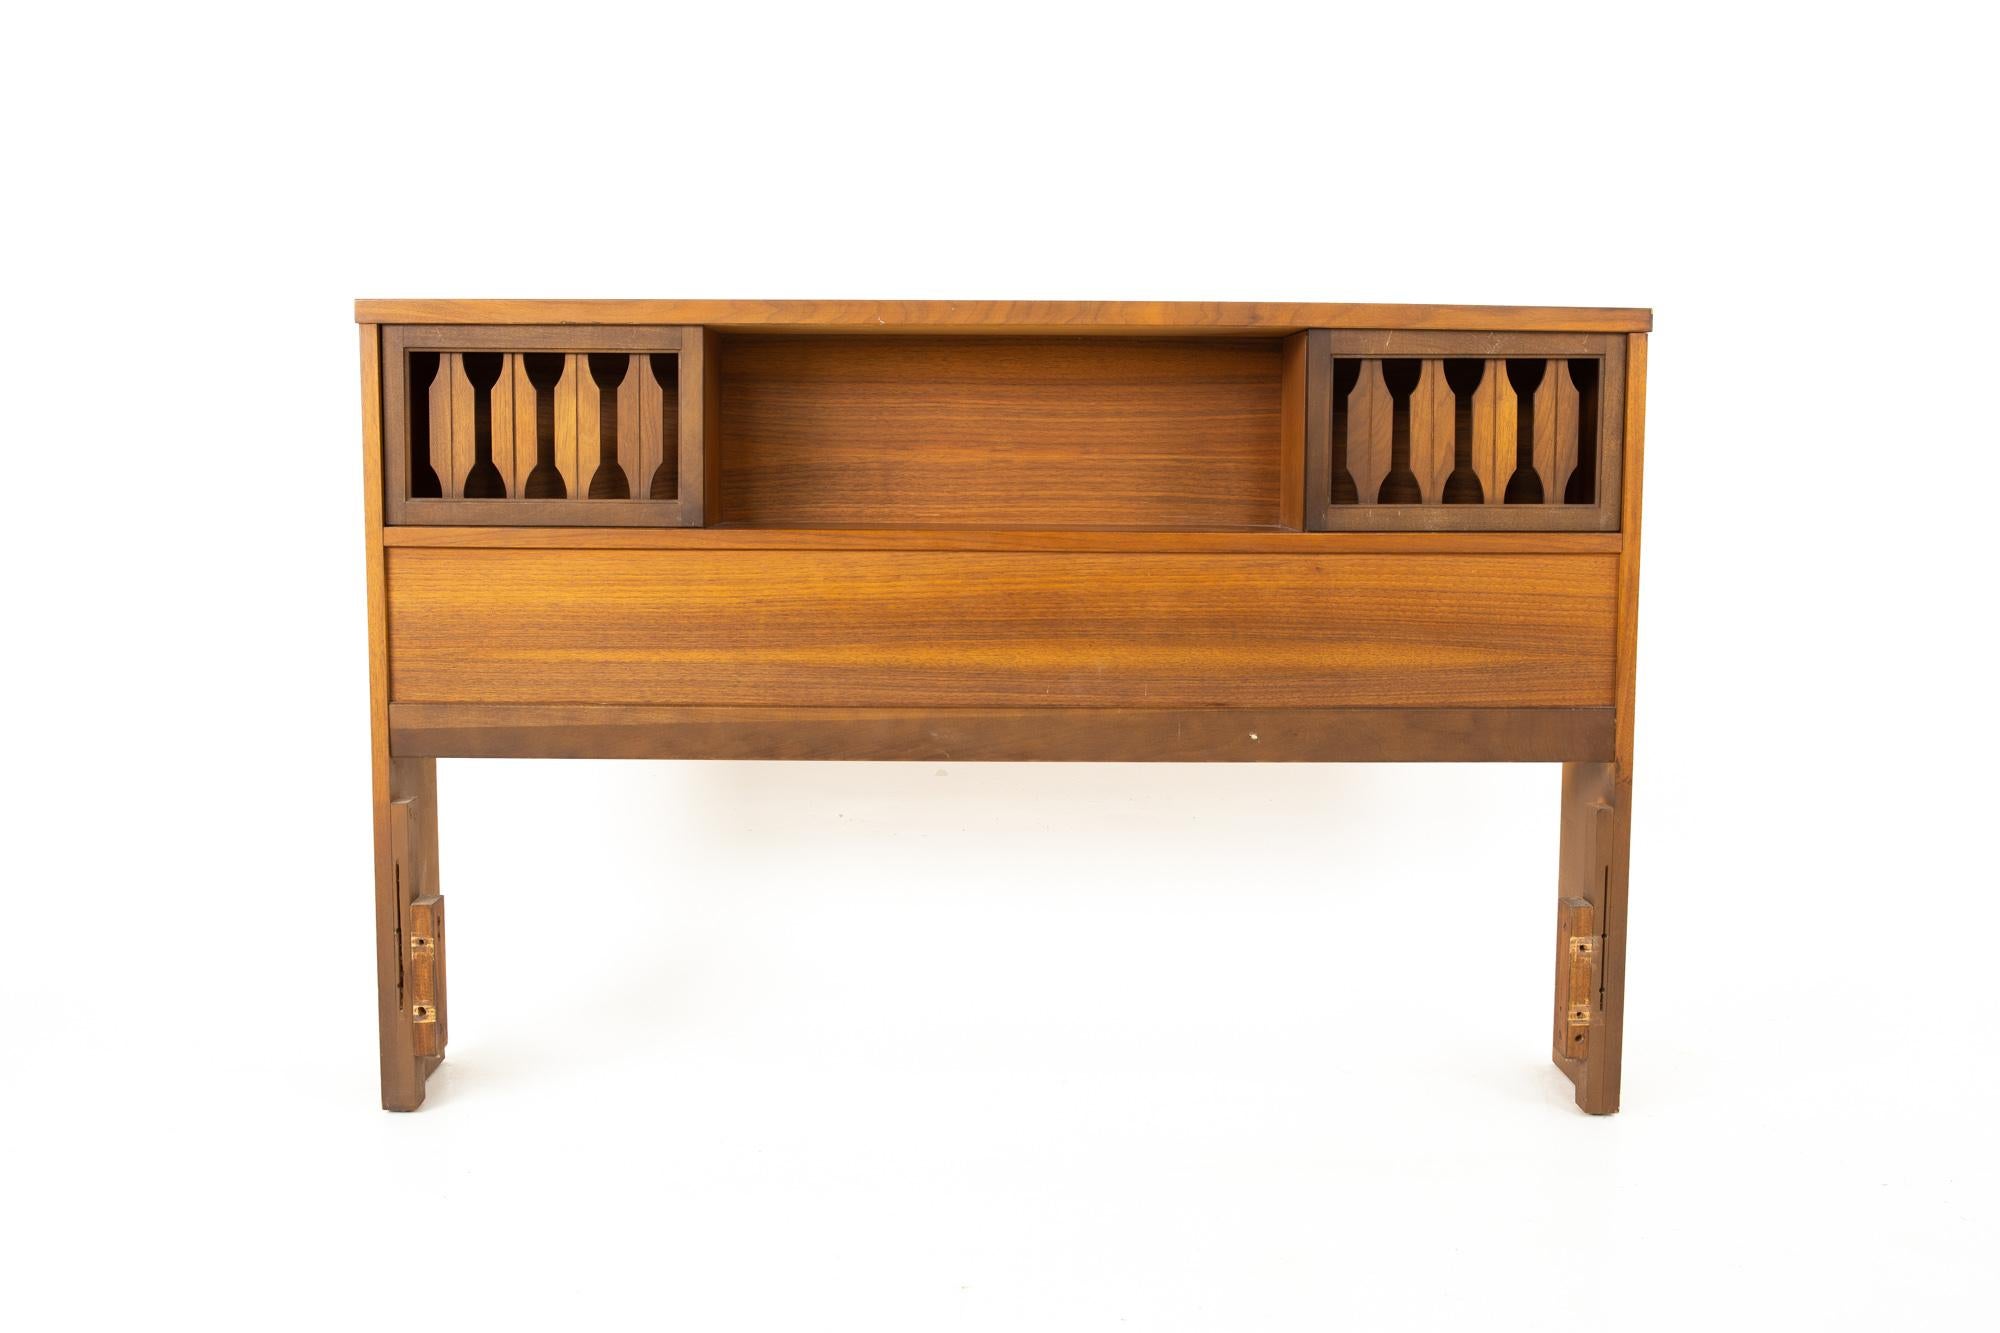 Johnson Carper Mid Century walnut full storage headboard
Head board measures: 56 wide x 8.25 deep x 36.25 inches high

All pieces of furniture can be had in what we call restored vintage condition. This means the piece is restored upon purchase so